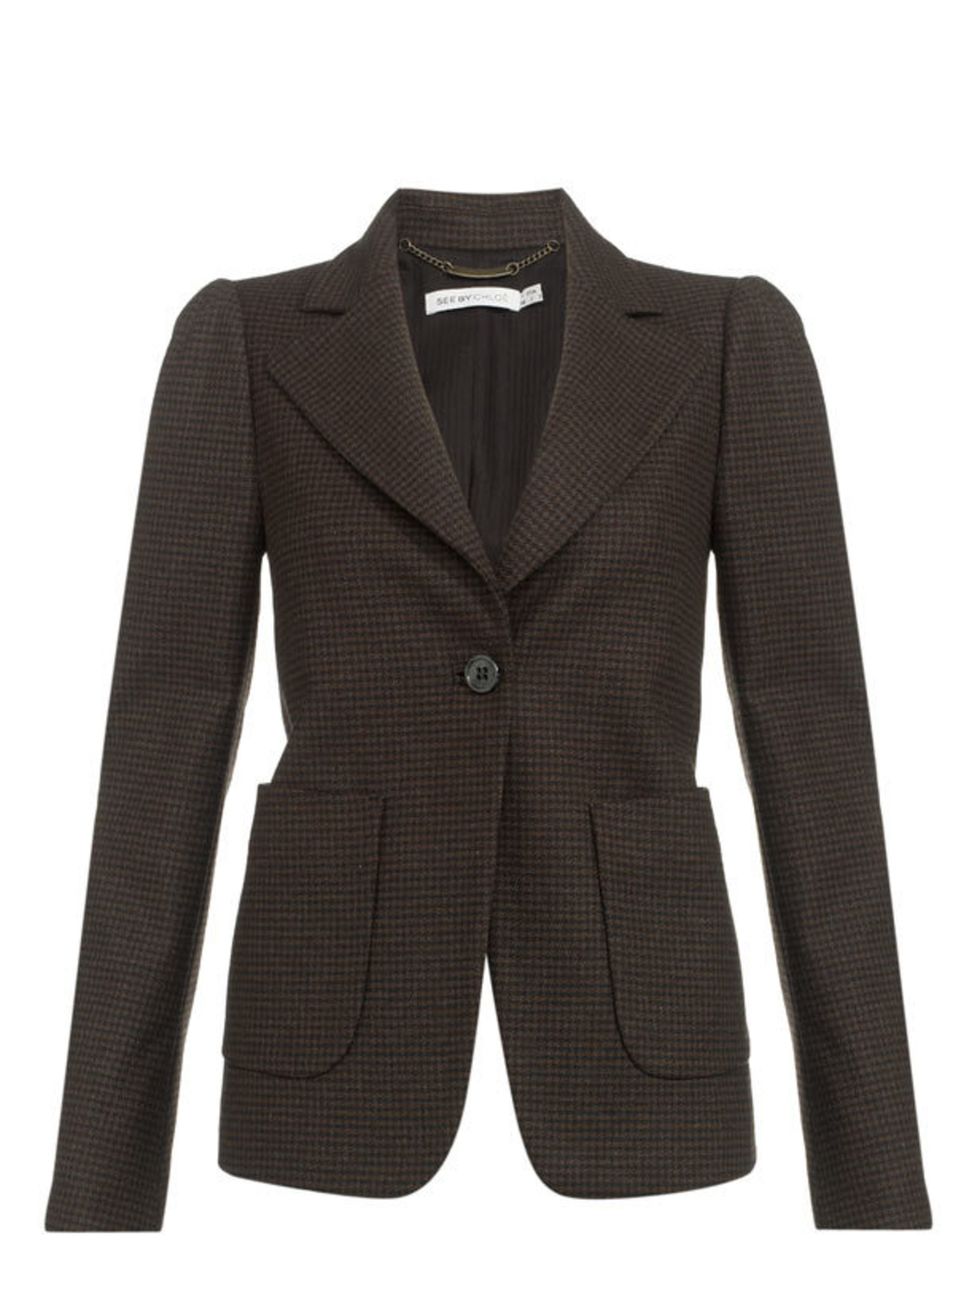 <p>See by Chloé tweed jacket, £499, at <a href="http://www.harrods.com/product/see-by-chloe/tweed-blazer/000000000002460708?dept=az&amp;cat1=b-see-by-chloe&amp;cat2=b-see-by-chloe-all">Harrods</a></p>